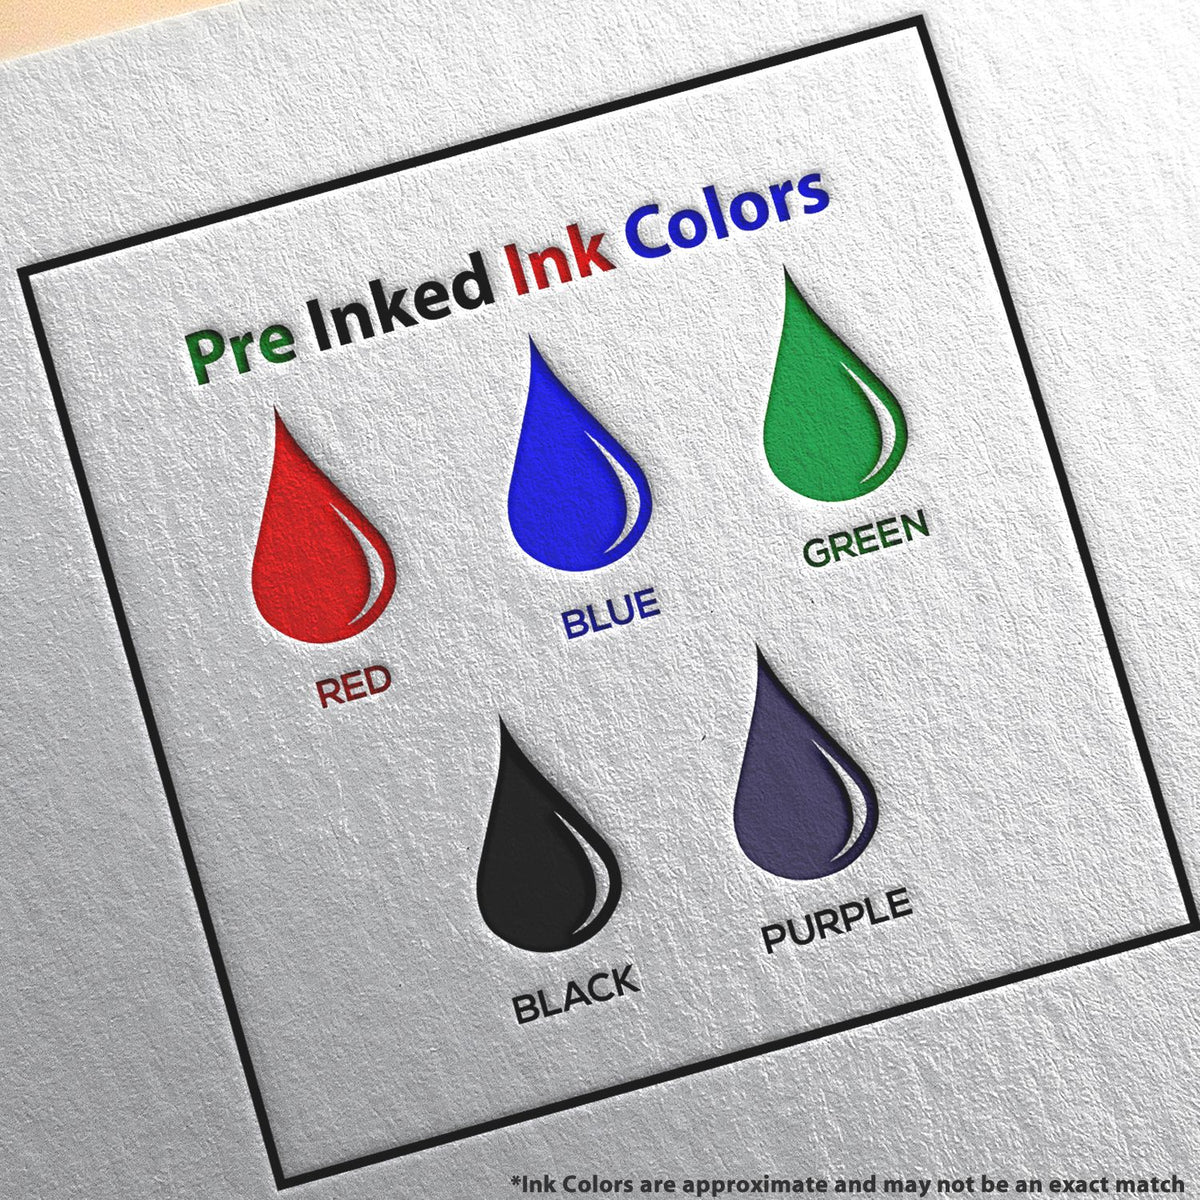 A picture showing the different ink colors or hues available for the PSI Minnesota Notary Stamp product.